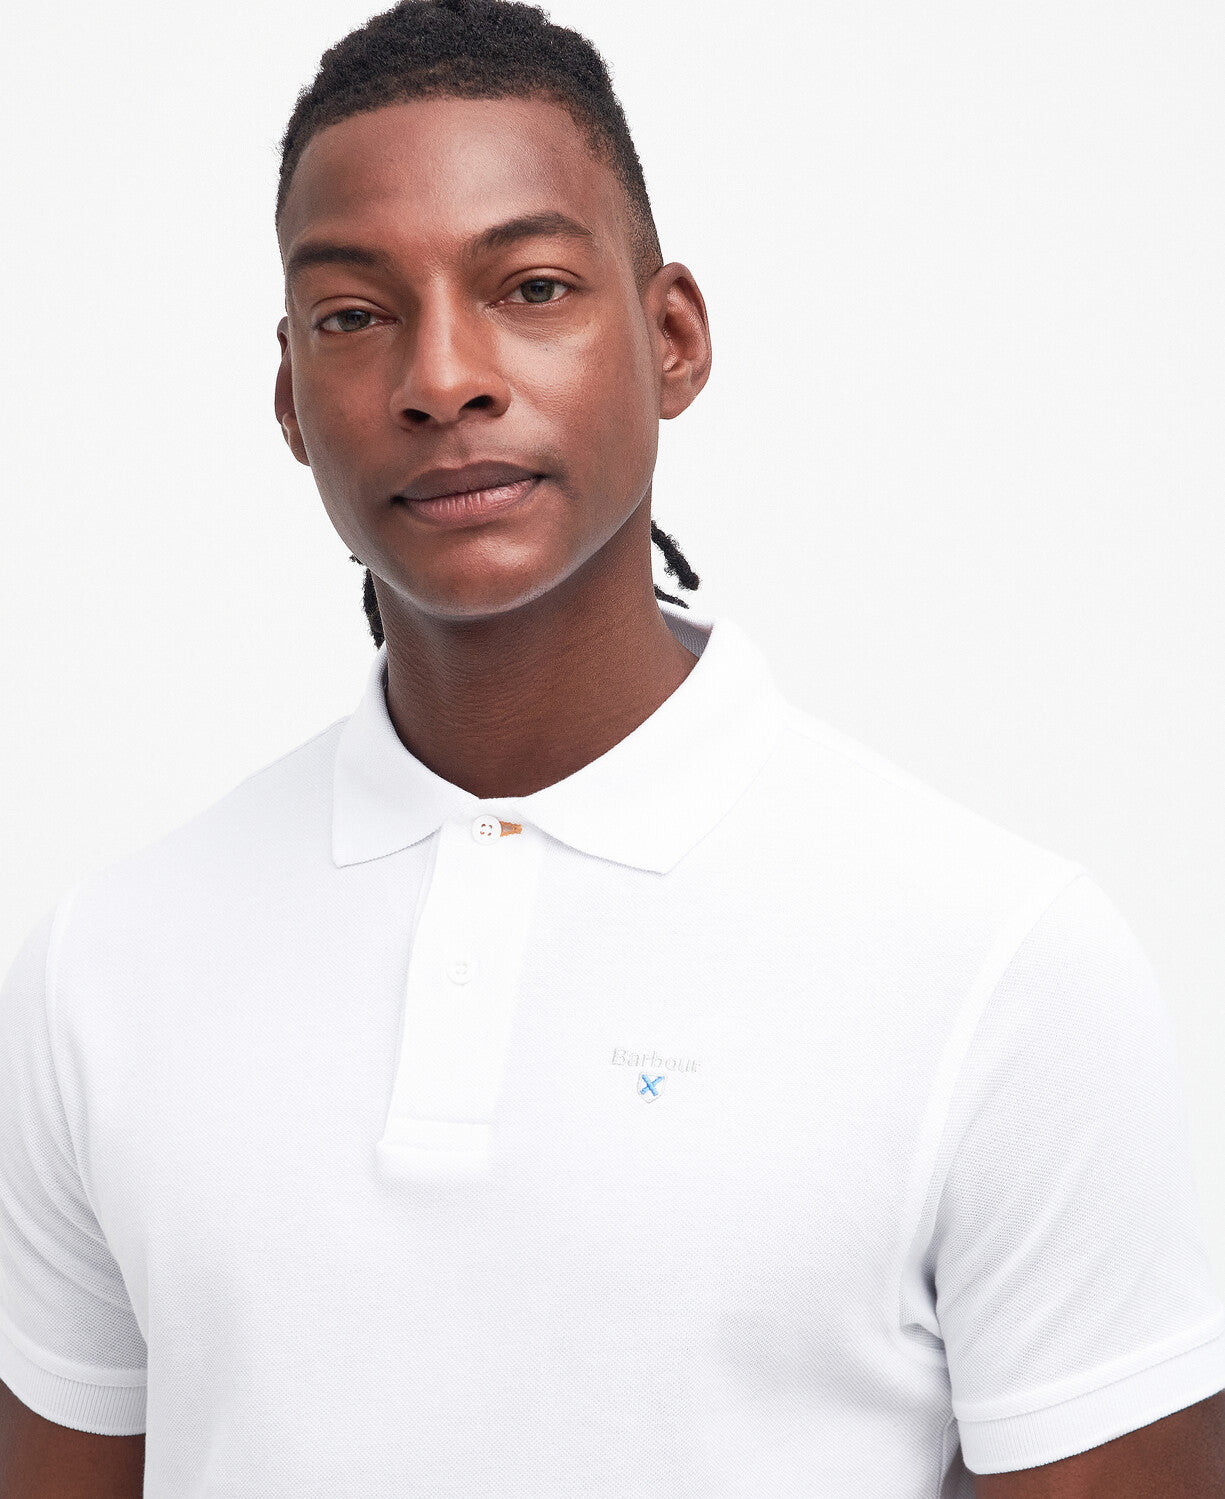 Barbour Sports Polo WH11 White